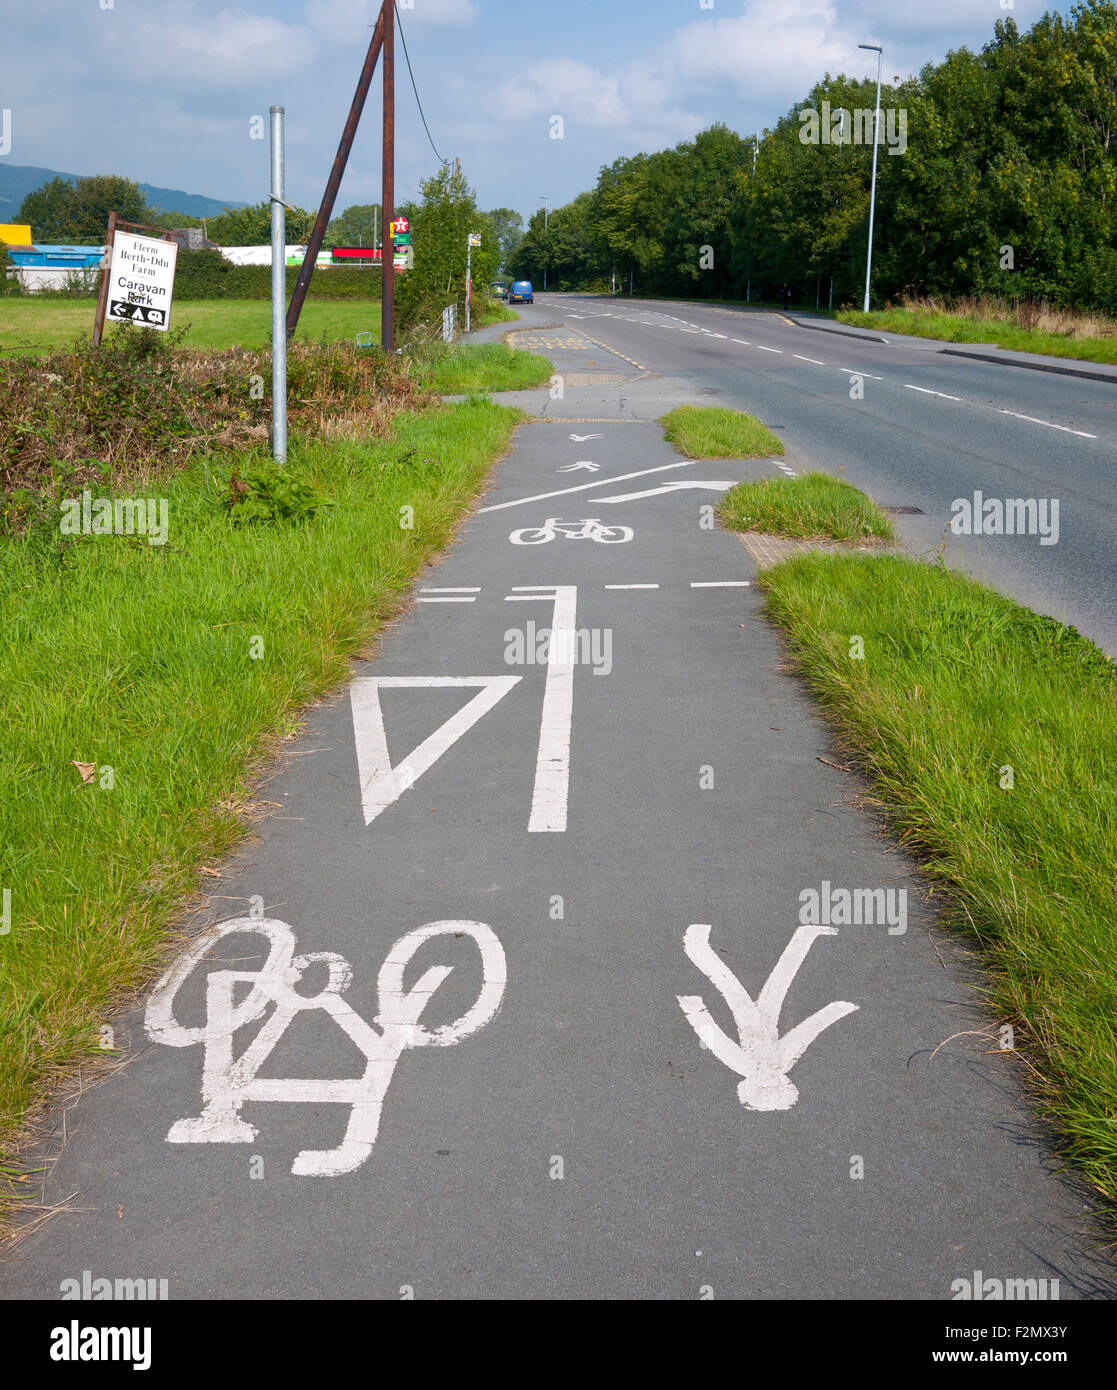 Cycle and pedestrian walkway by the side of the A470 between Betws-y-coed and Llanwrst, North Wales, UK. Stock Photo